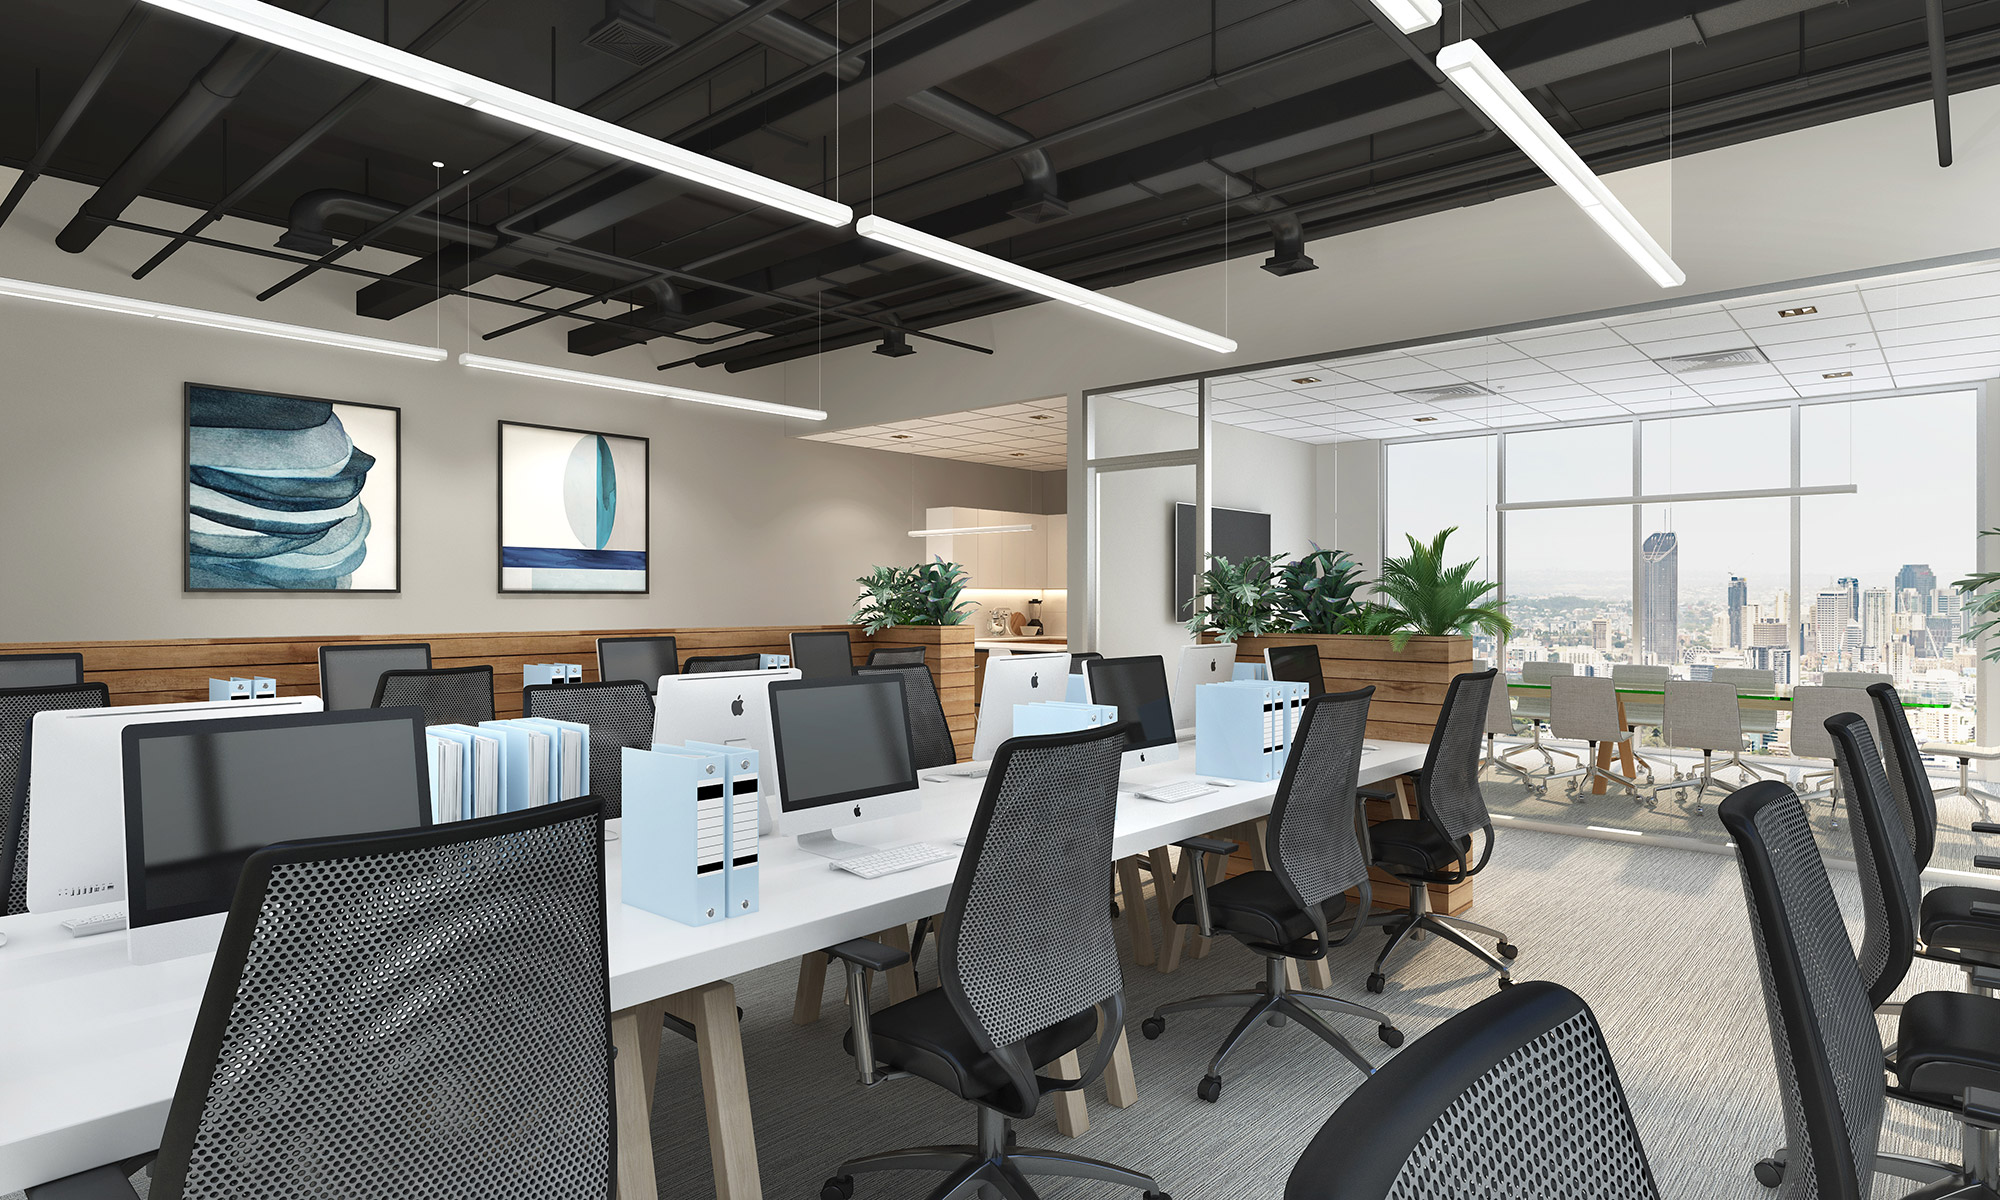 7572 Sus7415 0928 Edge Suspended Lighting Fixture Installed On Office Space : This Is A Sample Rendering For The Company Aron Lightin